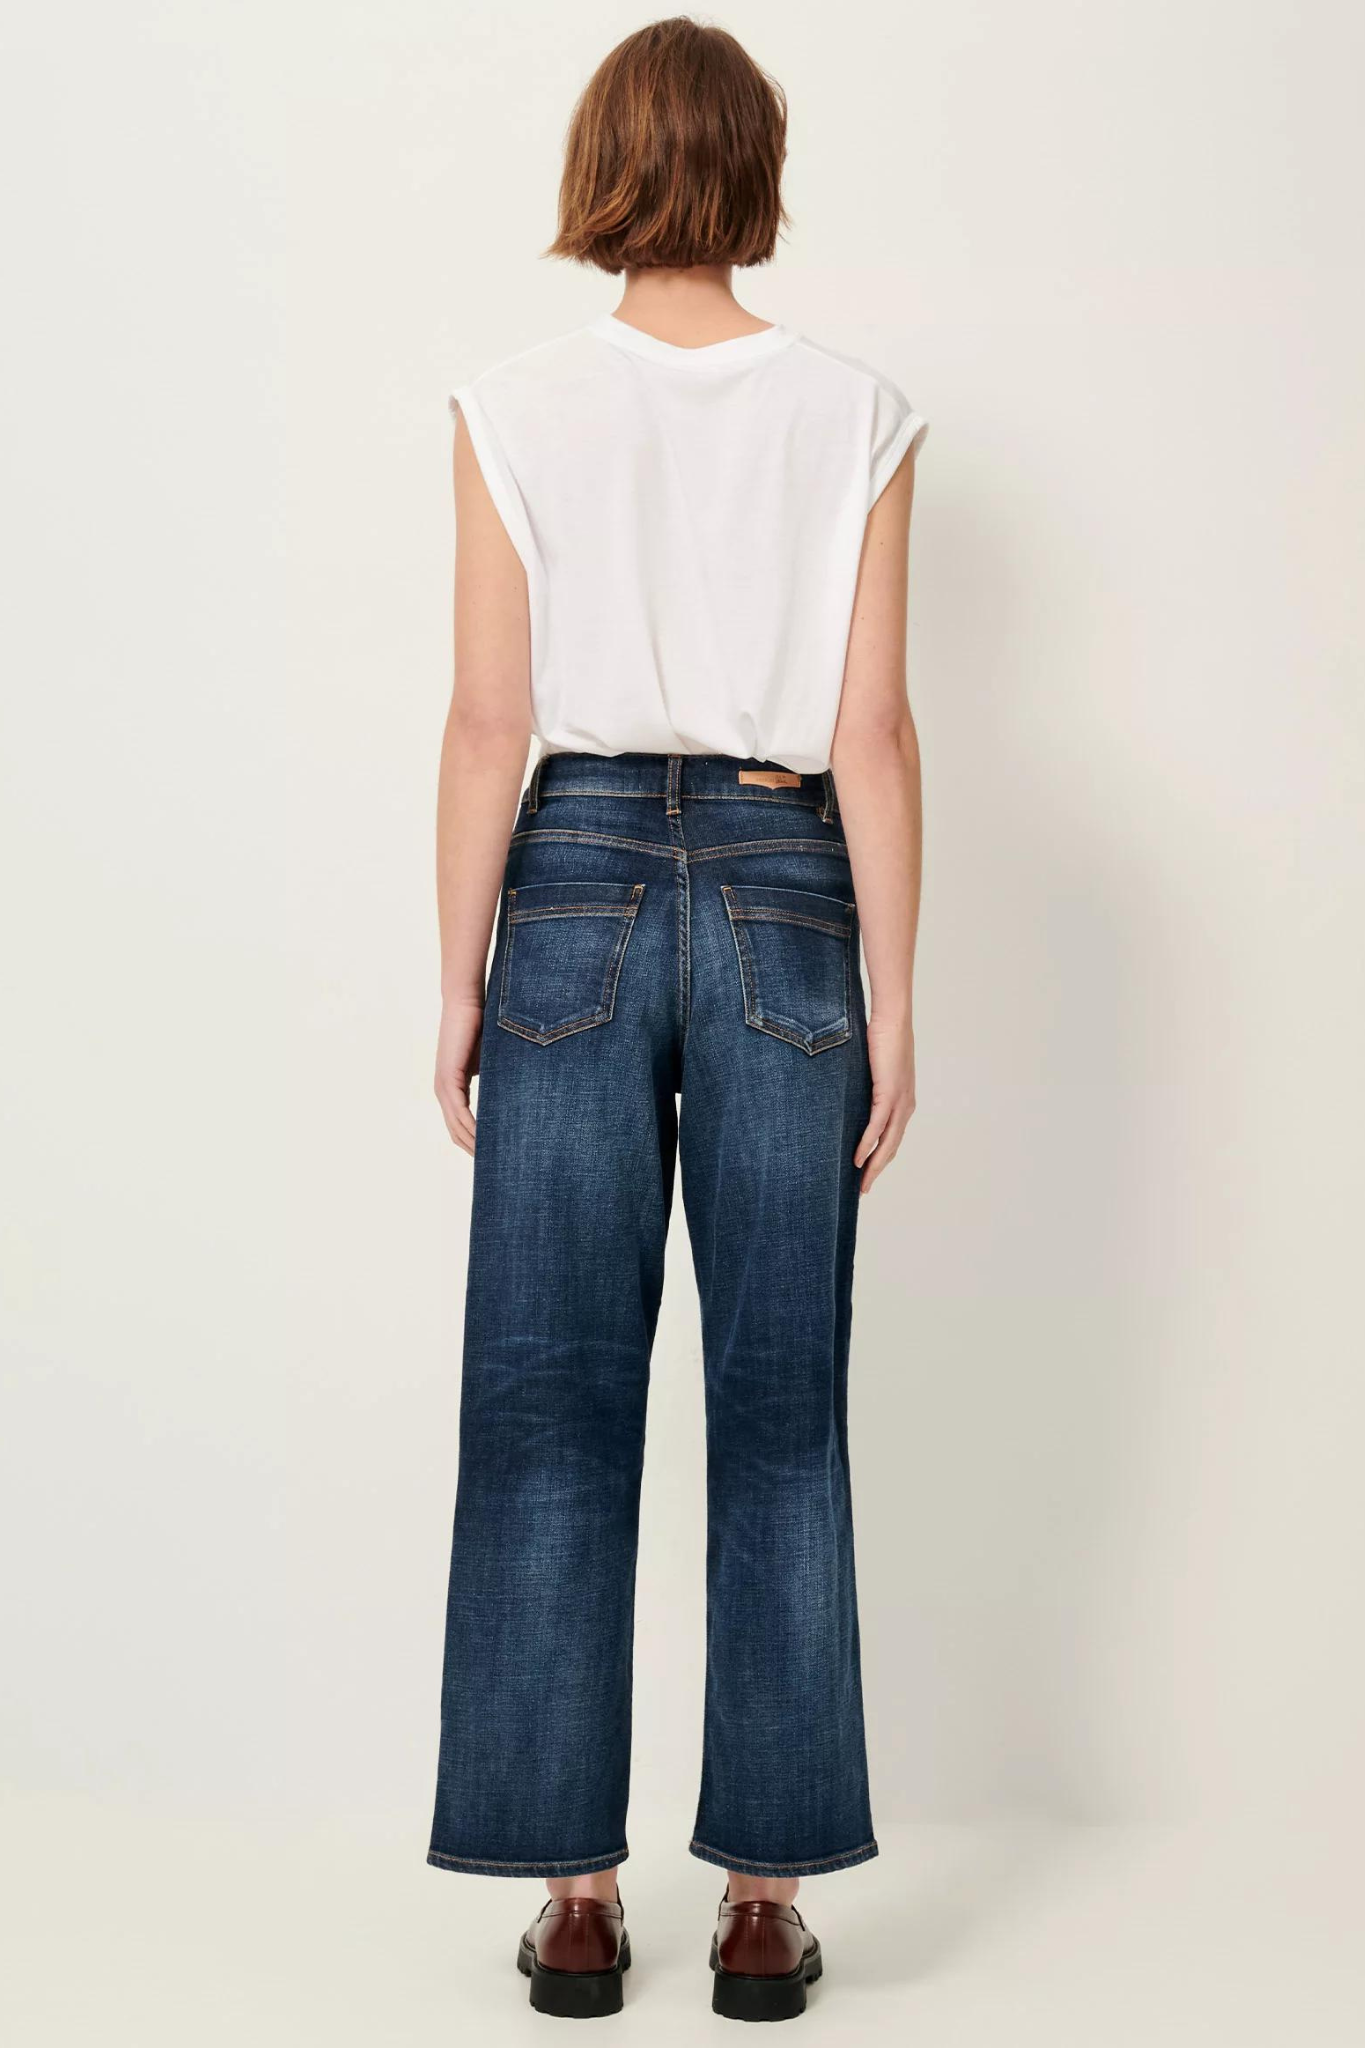 BAY CRUISE JEANS - MELODY BLUE